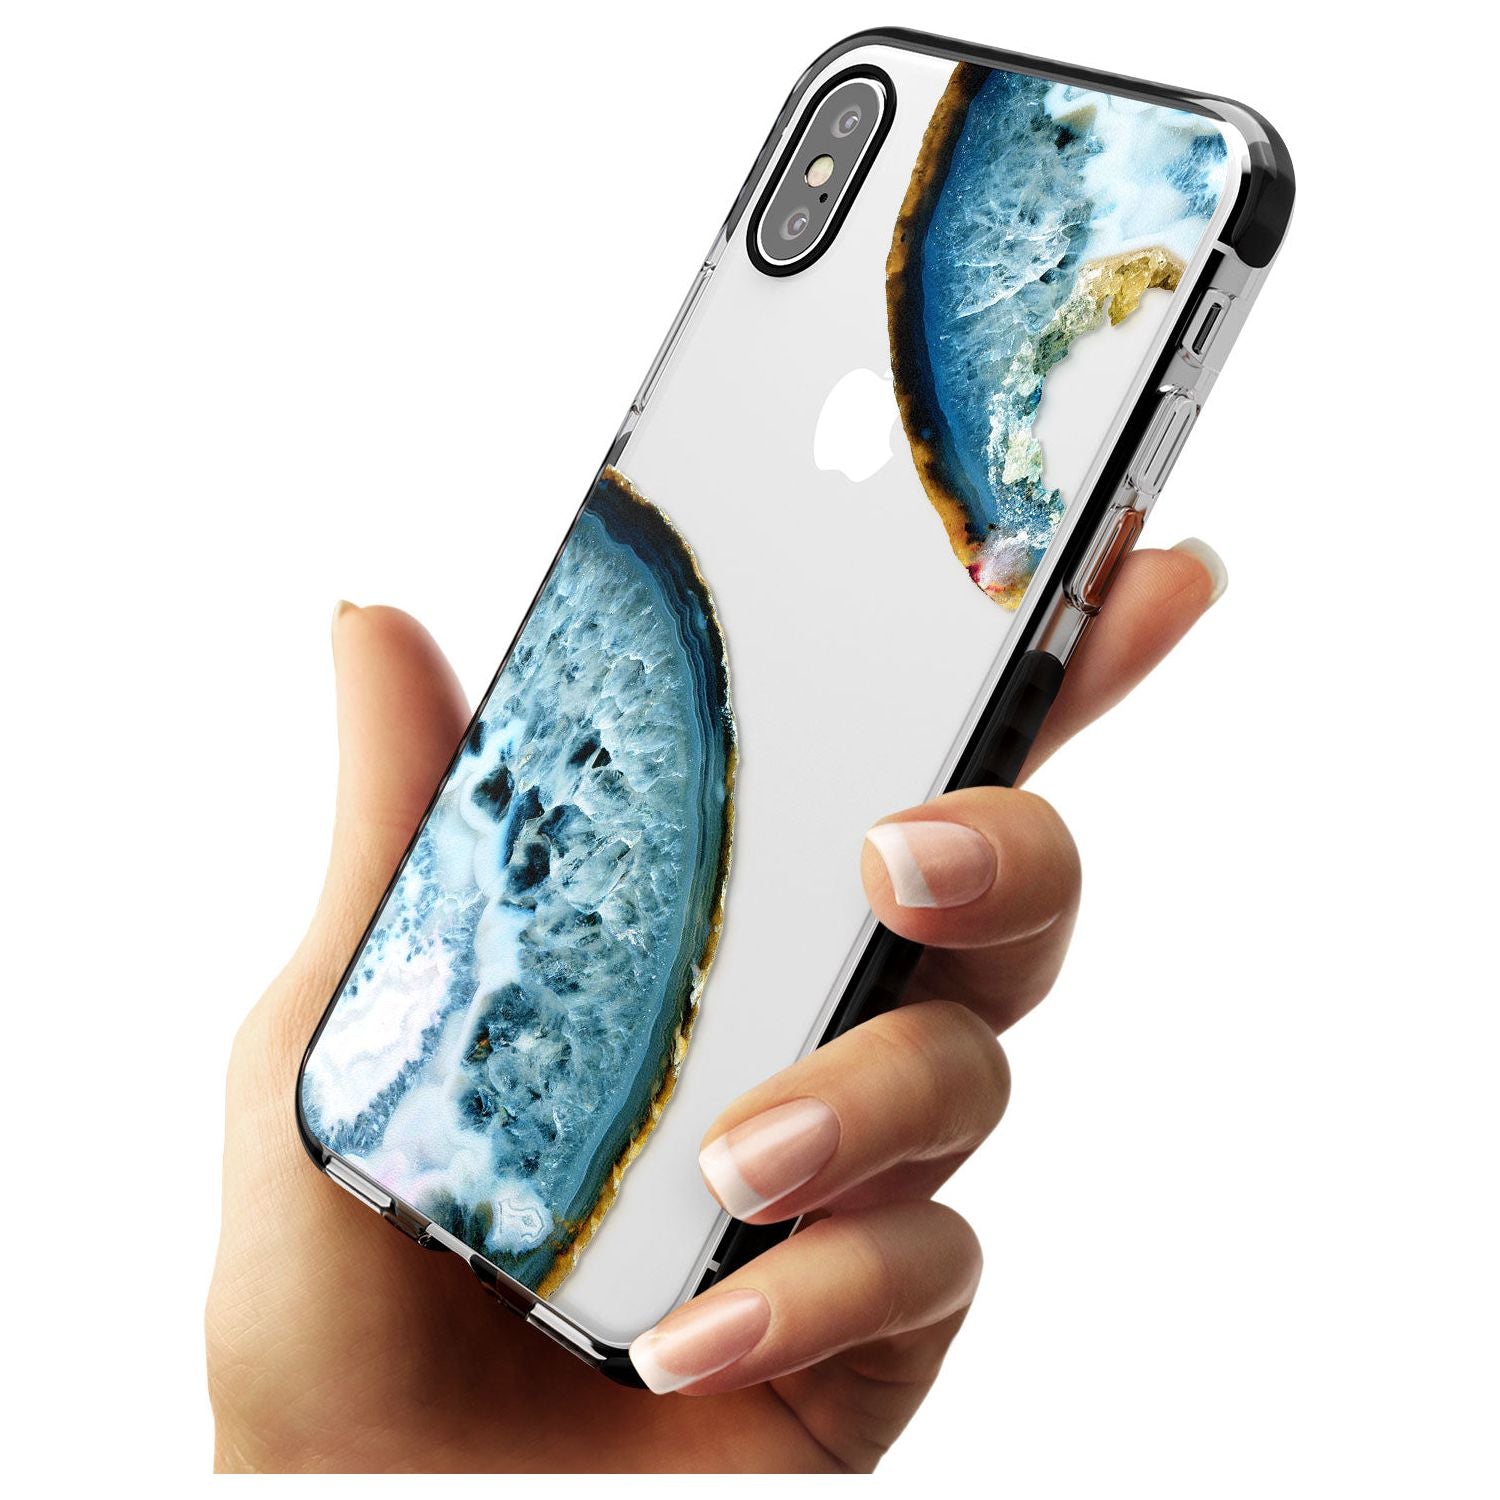 Blue, White & Yellow Agate Gemstone Black Impact Phone Case for iPhone X XS Max XR